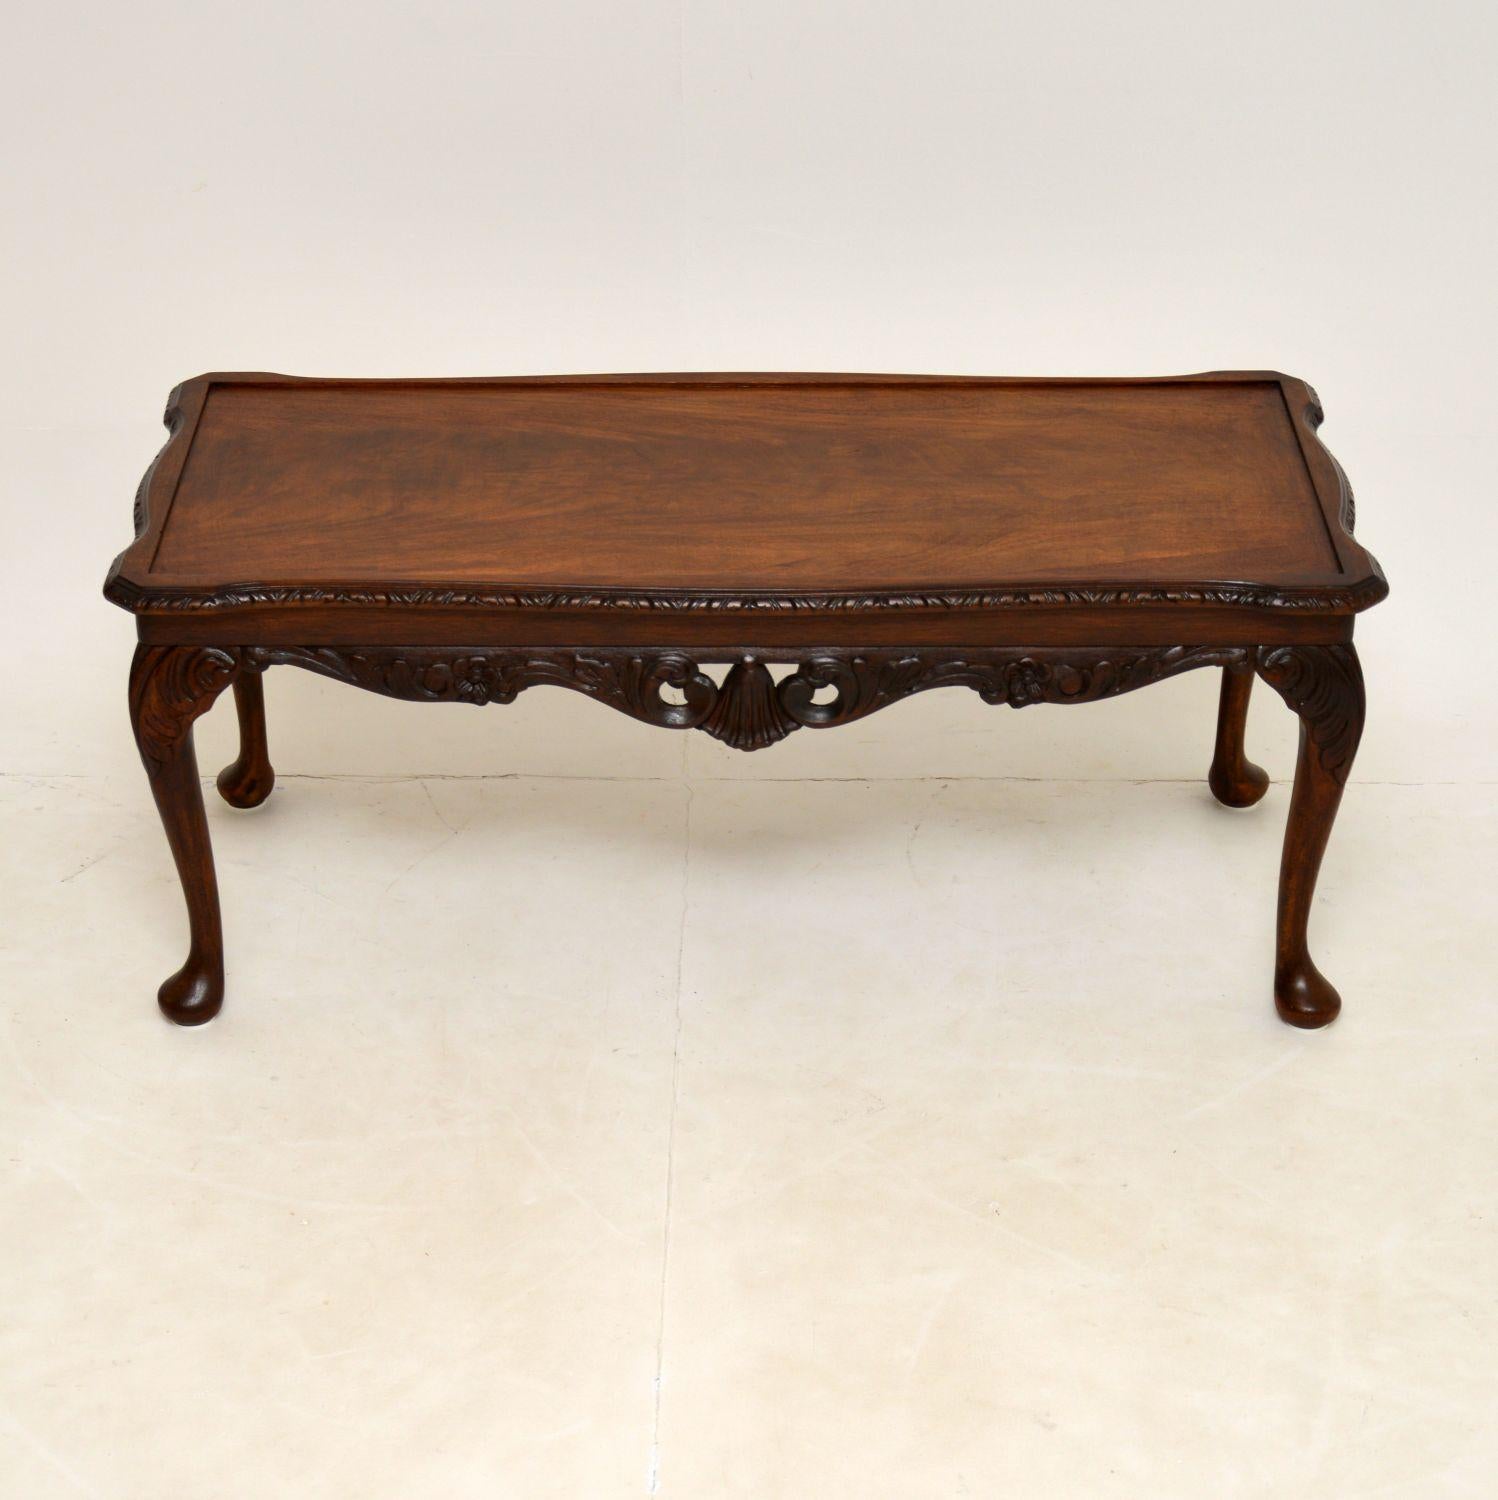 A fine quality mahogany coffee table in the antique Queen Anne style. This was made in England & dates from around the 1930-50’s.

There is lovely carving around the edges and legs, with beautiful flame mahogany veneers on the top.

This has